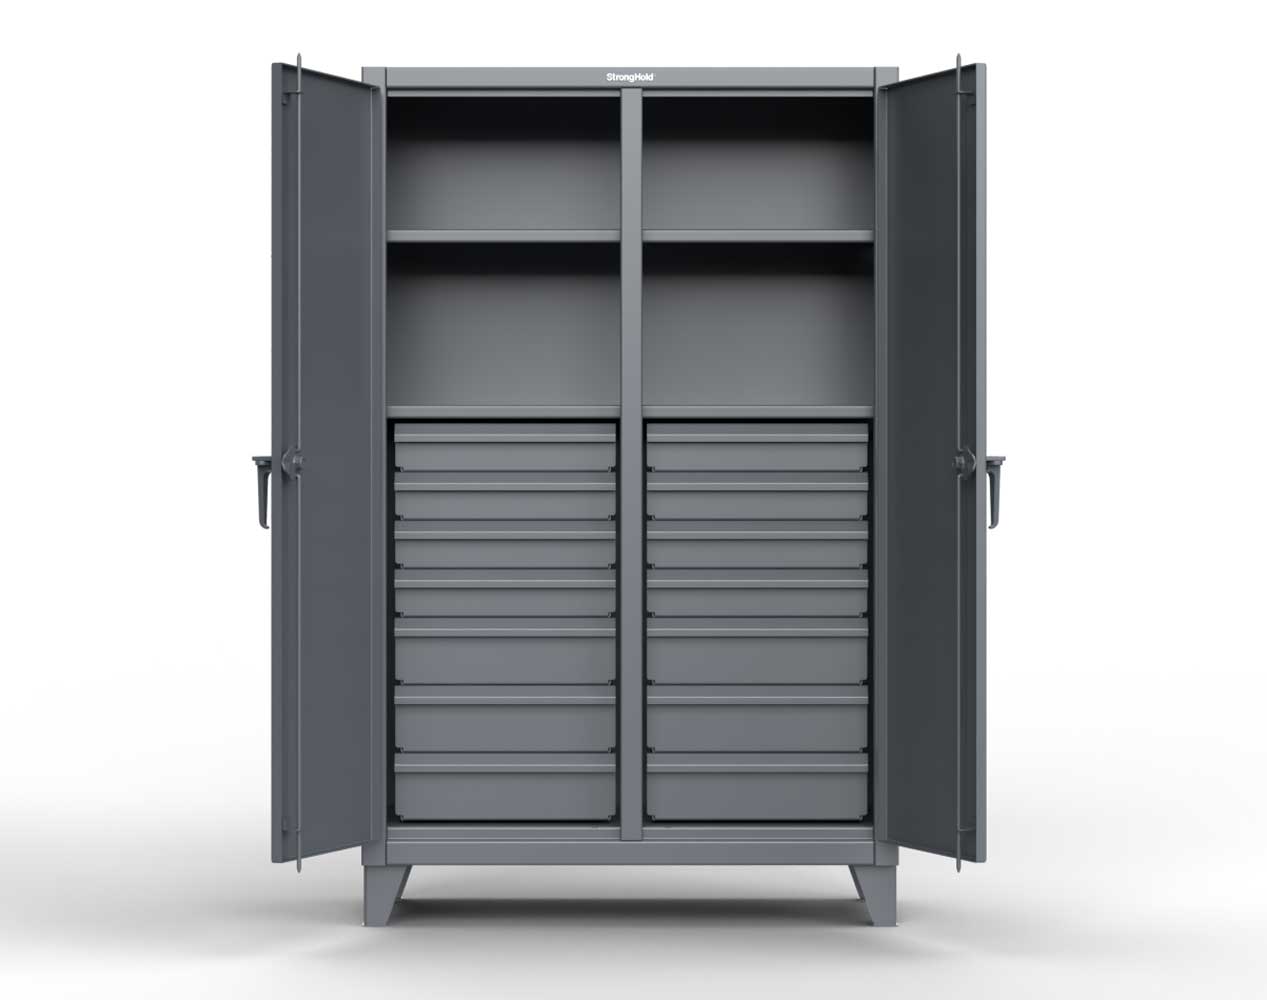 Extreme Duty 12 GA Double Shift Cabinet with 14 Drawers, 4 Shelves - 60 In. W x 24 In. D x 78 In. H